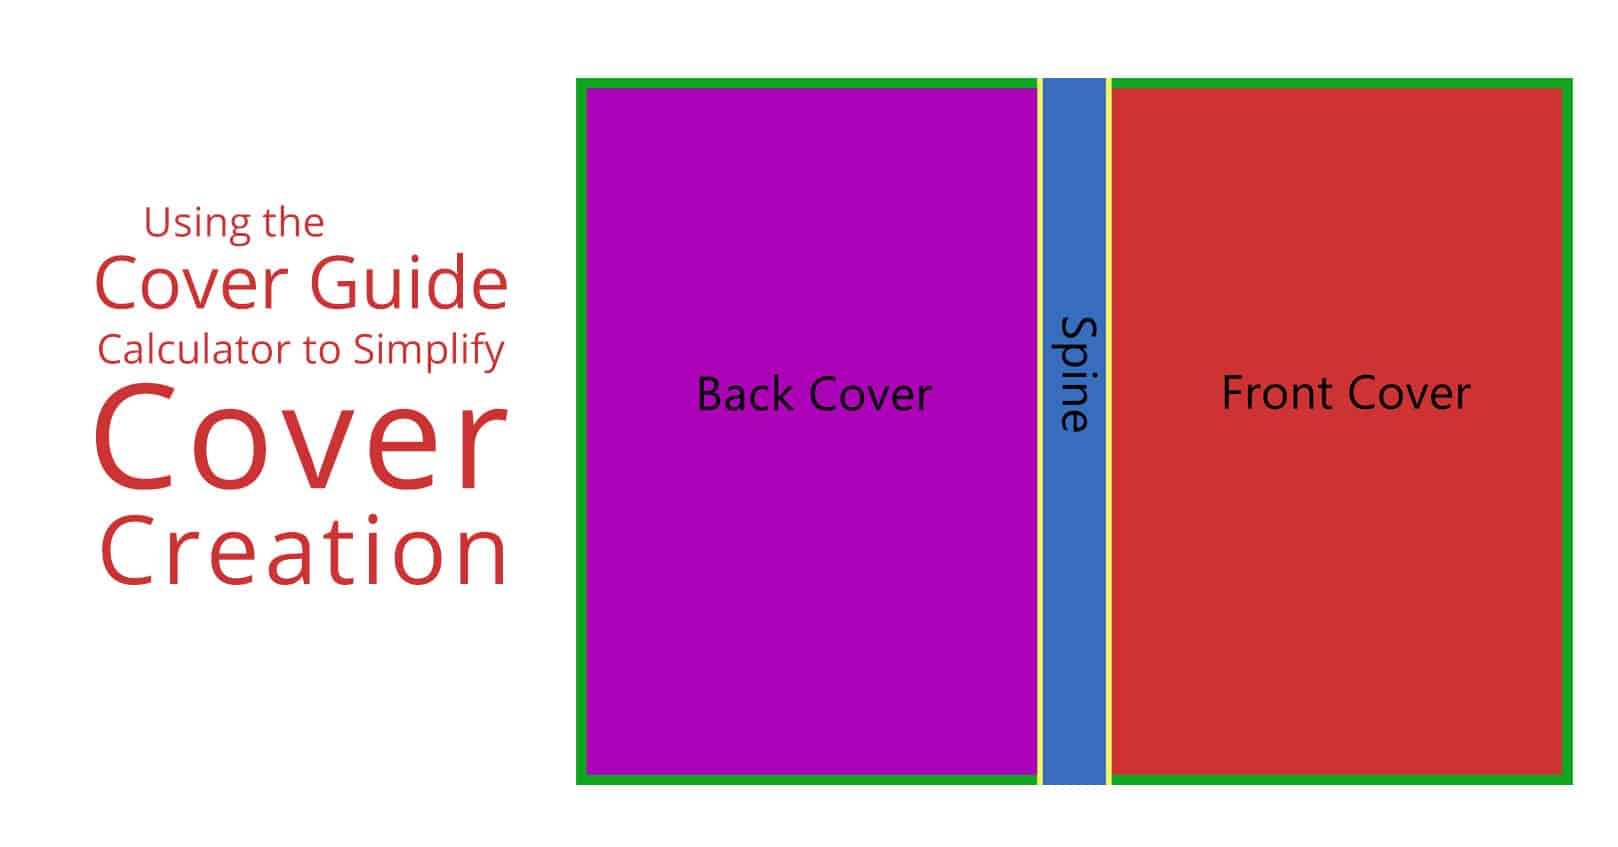 Using the Cover Guide Calculator to Simplify Cover Creation